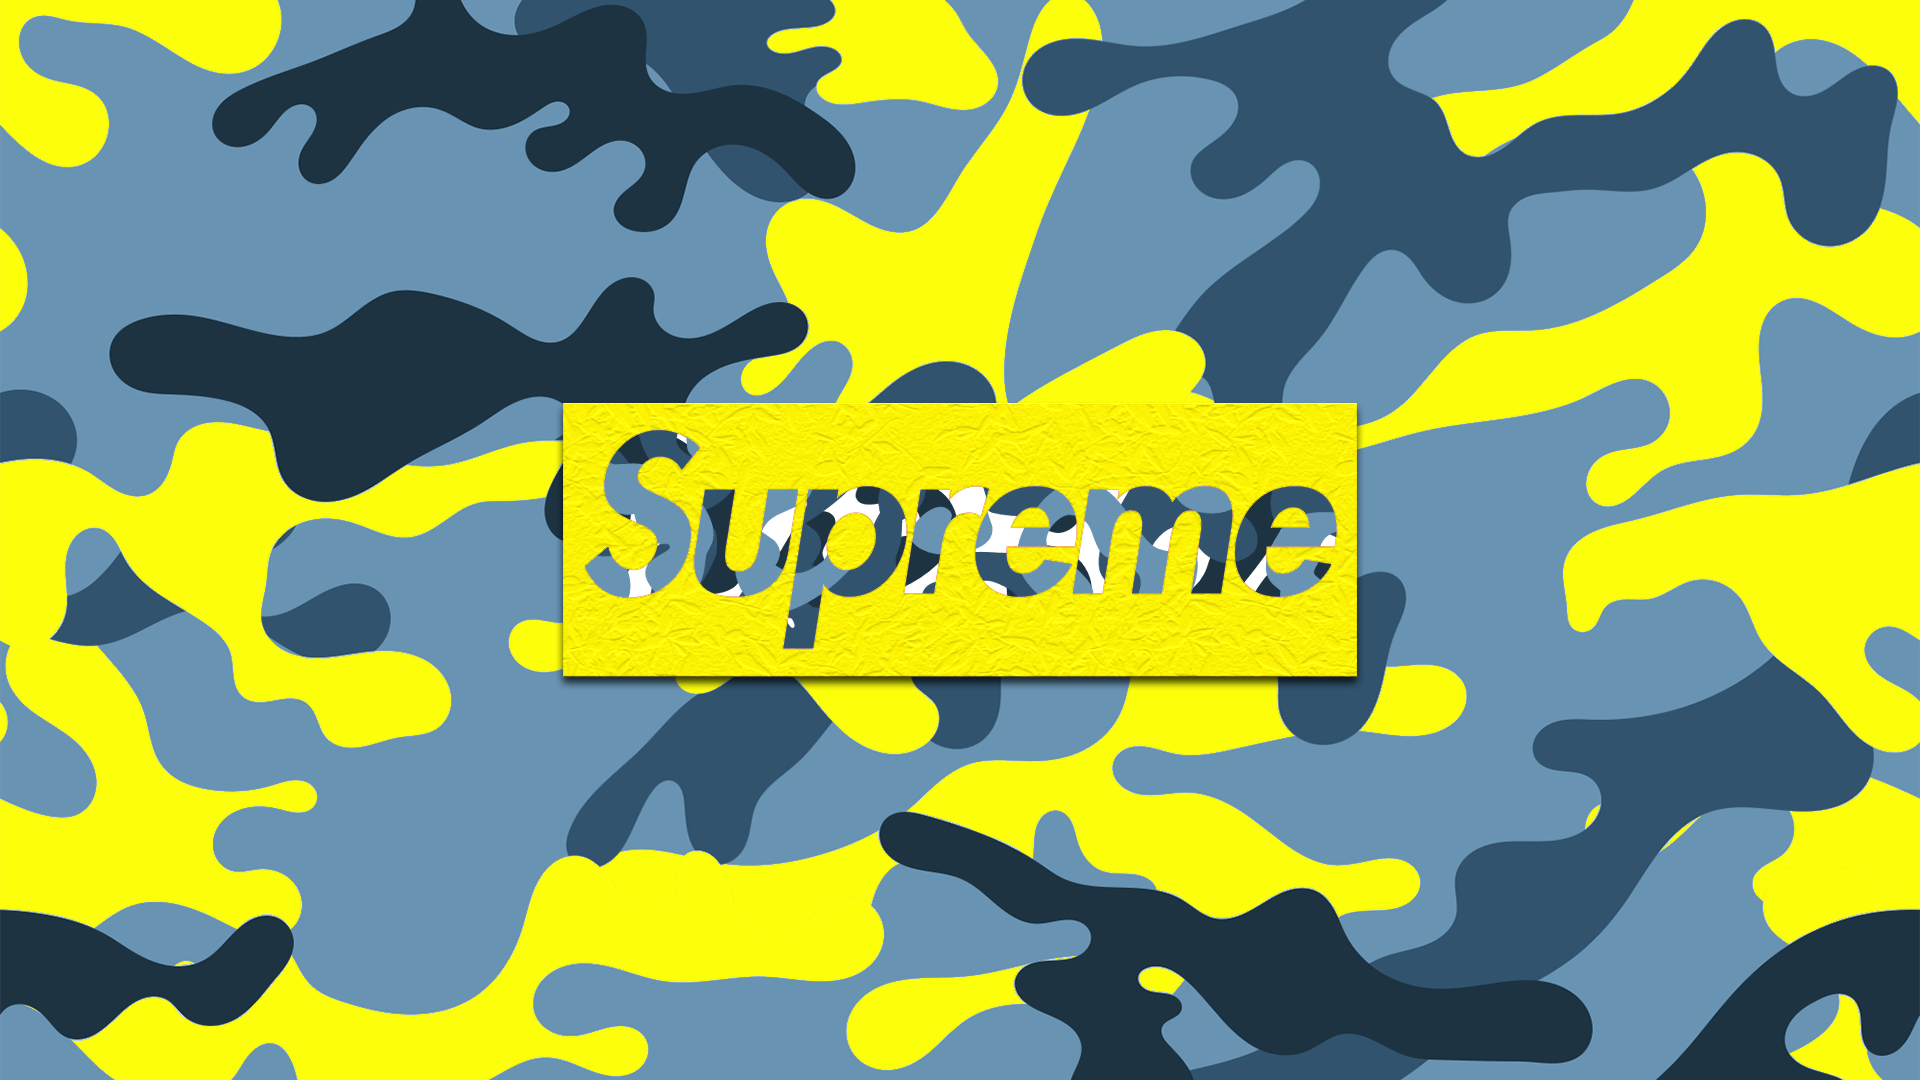 HD supreme background wallpapers